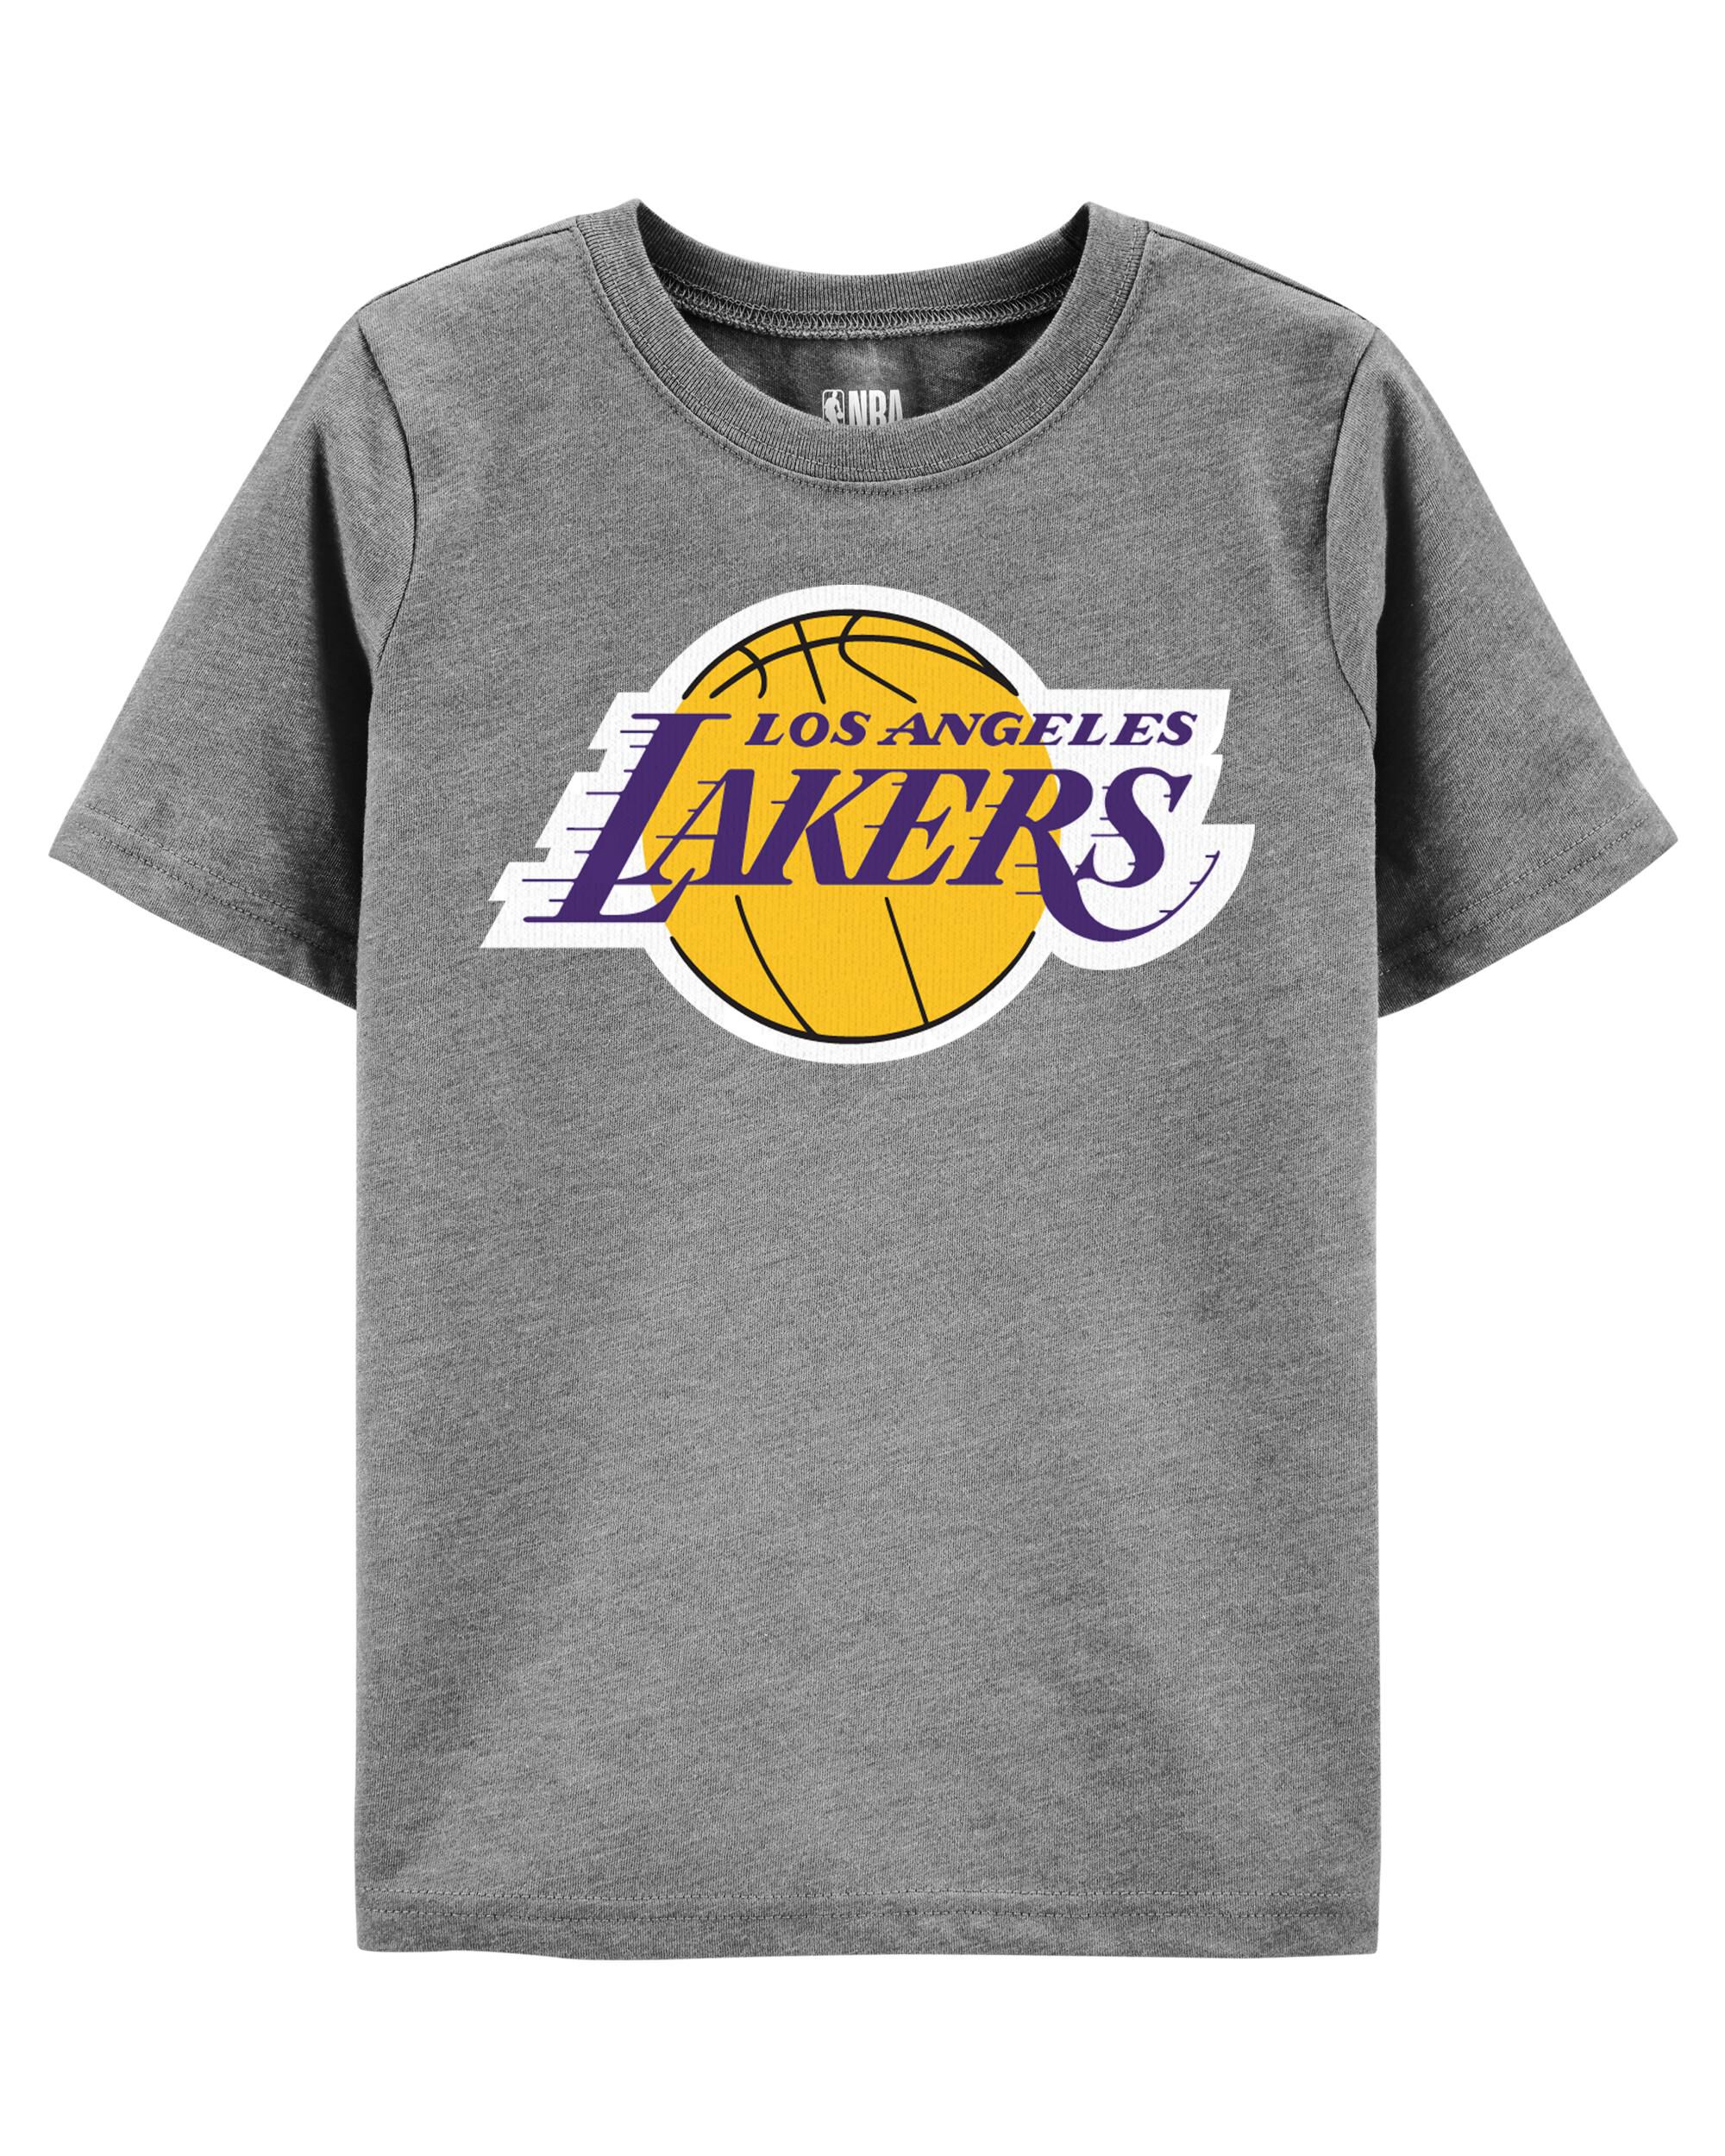 lakers kids clothing